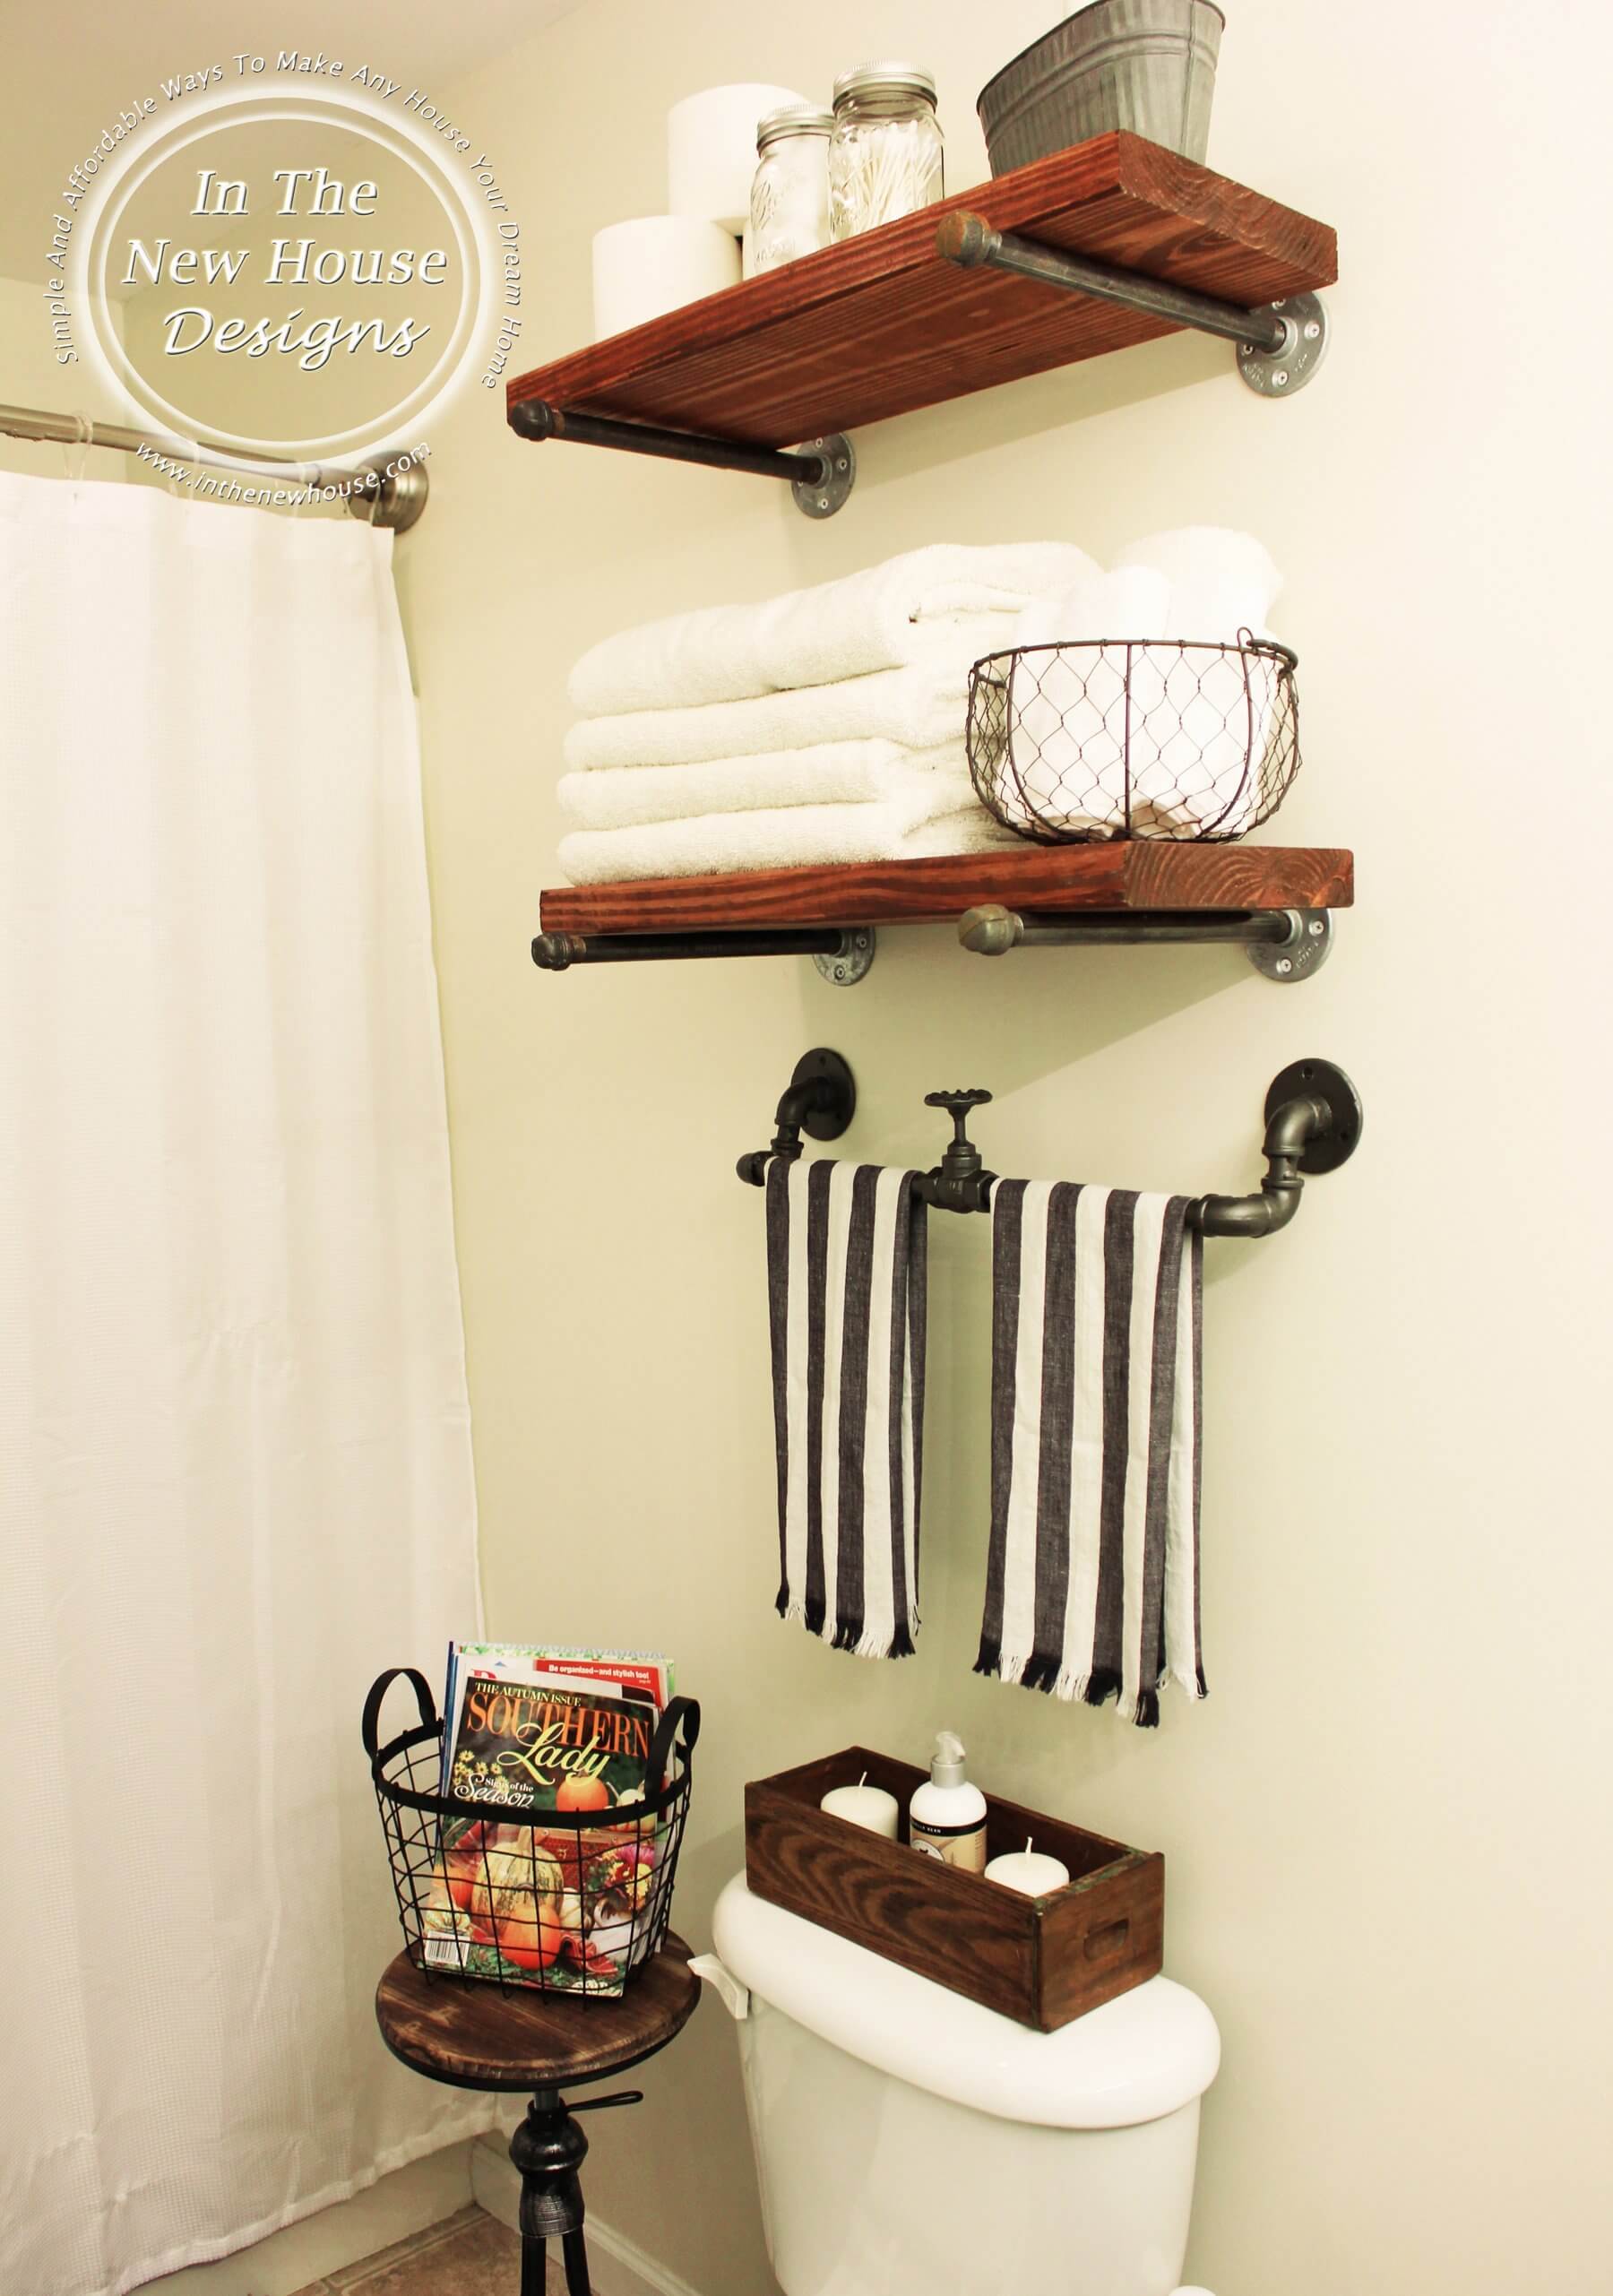 Nautical-Inspired Stained Wood Shelving